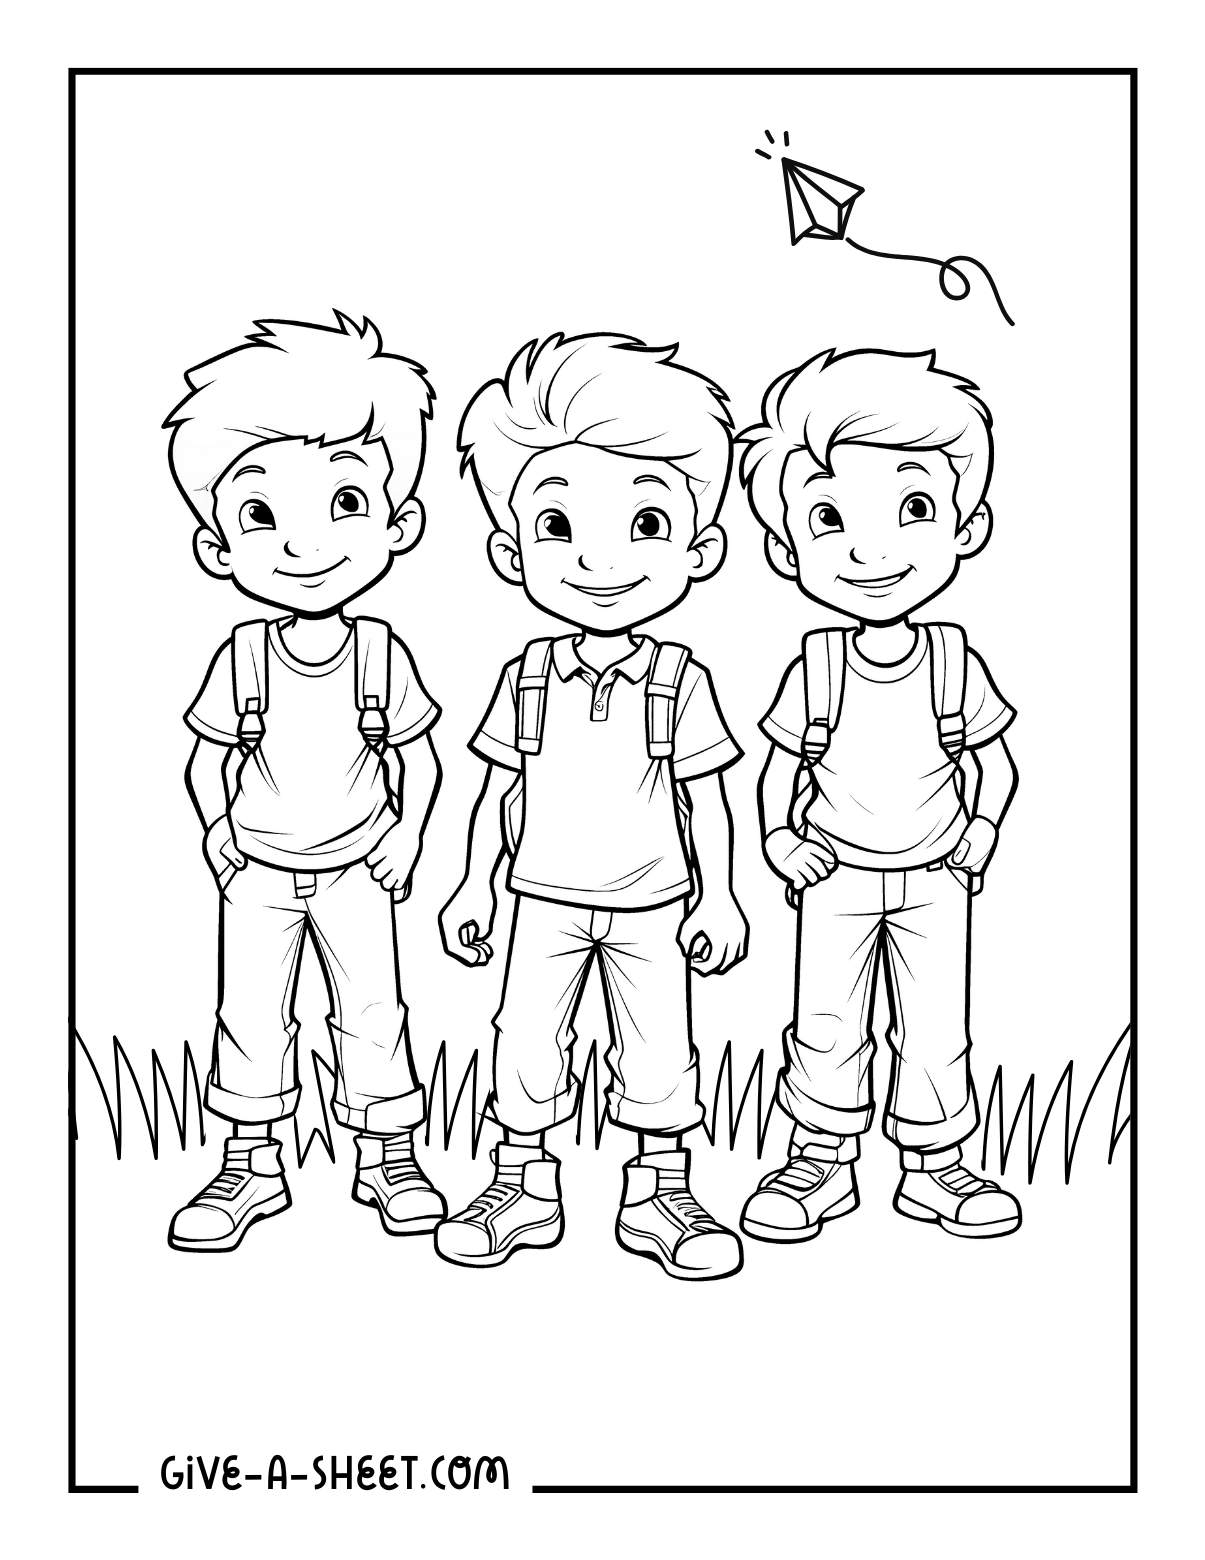 3 bff coloring sheet for school boys.